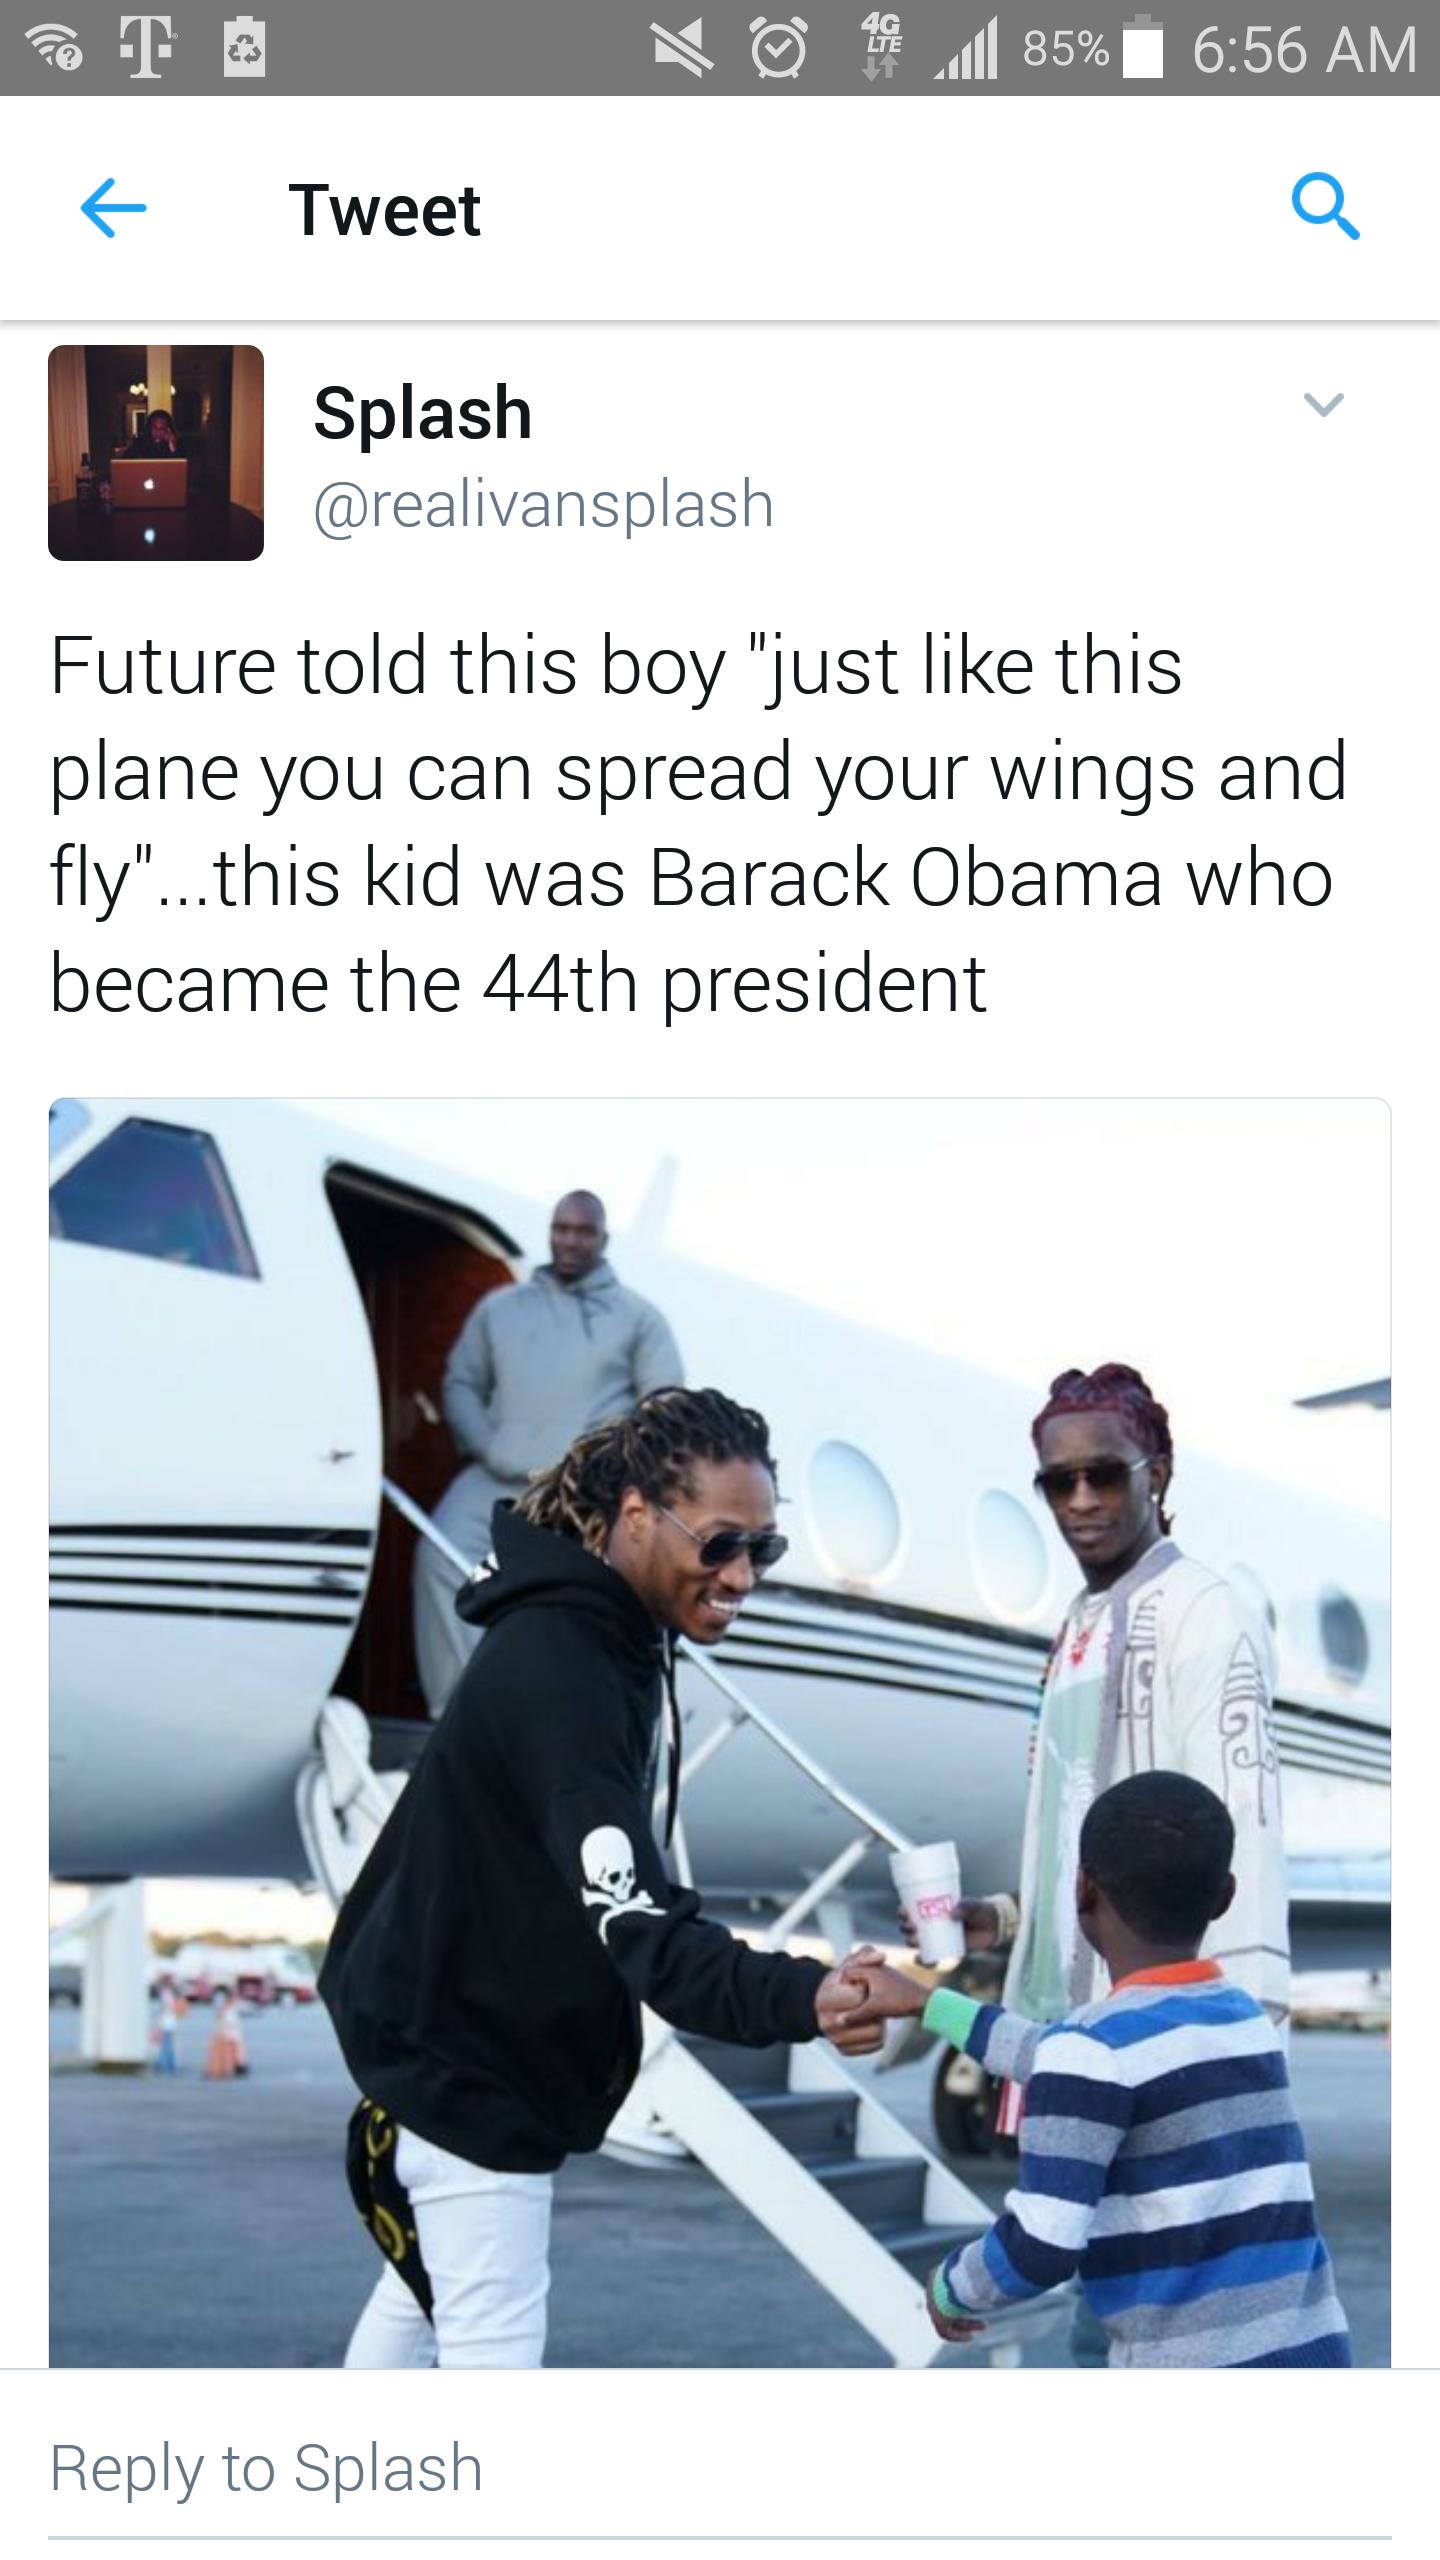 kid was barack obama meme - all 85% Tweet Tweet Splash Future told this boy "just this plane you can spread your wings and fly"...this kid was Barack Obama who became the 44th president to Splash